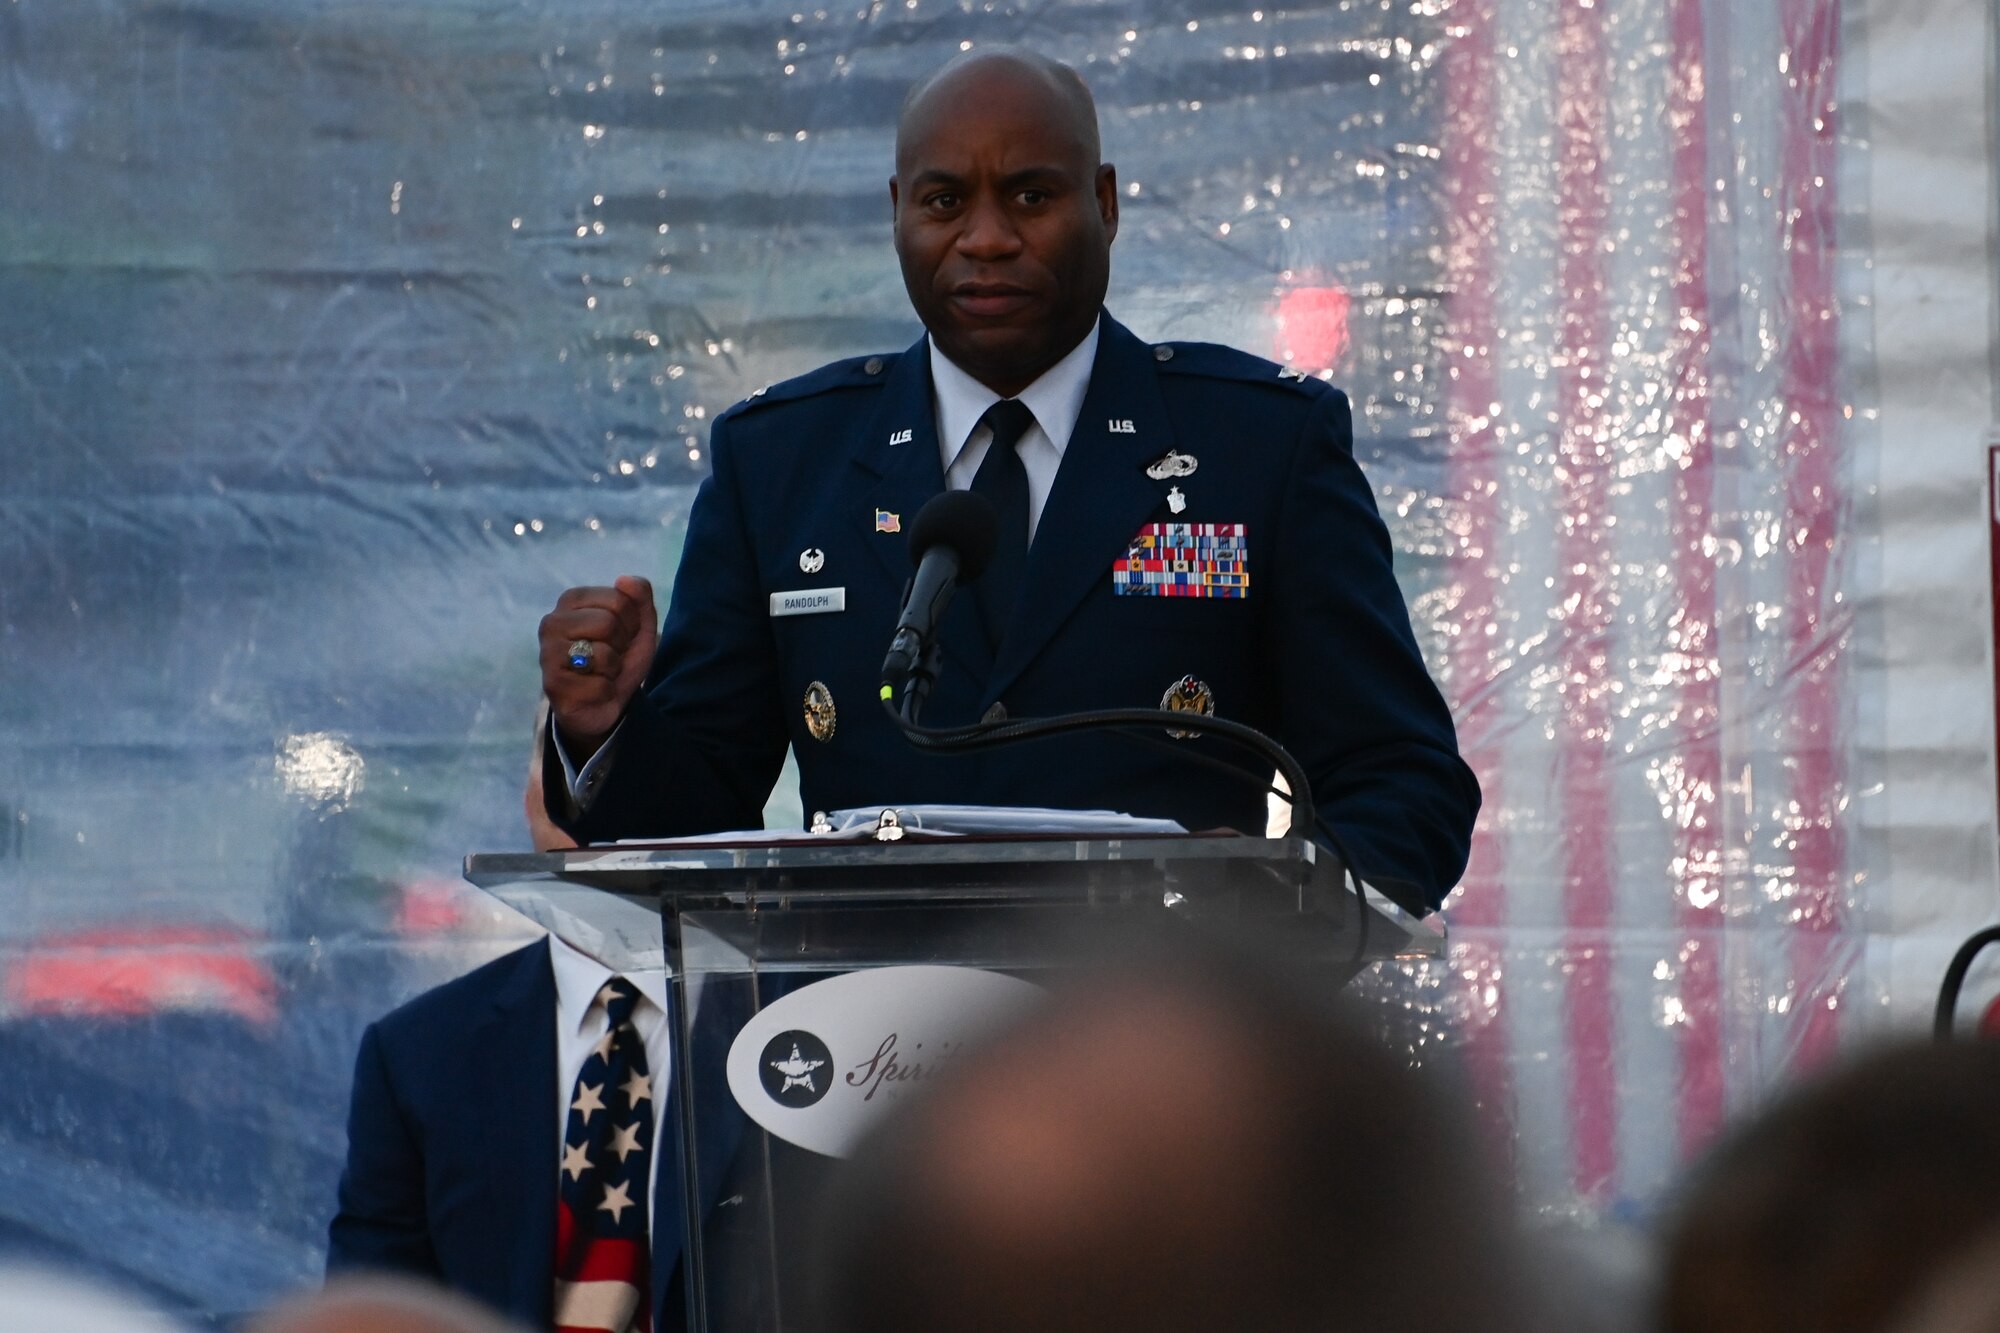 Col. Todd E. Randolph, 316th Wing and installation commander, delivers remarks at the opening of Spirit Park in National Harbor, Md., Nov. 11, 2022. 13 flags were transported to the National Harbor from their original locations through multiple modes of transportation such as a boat, swimming, running and cycling. (U.S. Air Force photo by Staff Sgt. Spencer Slocum)